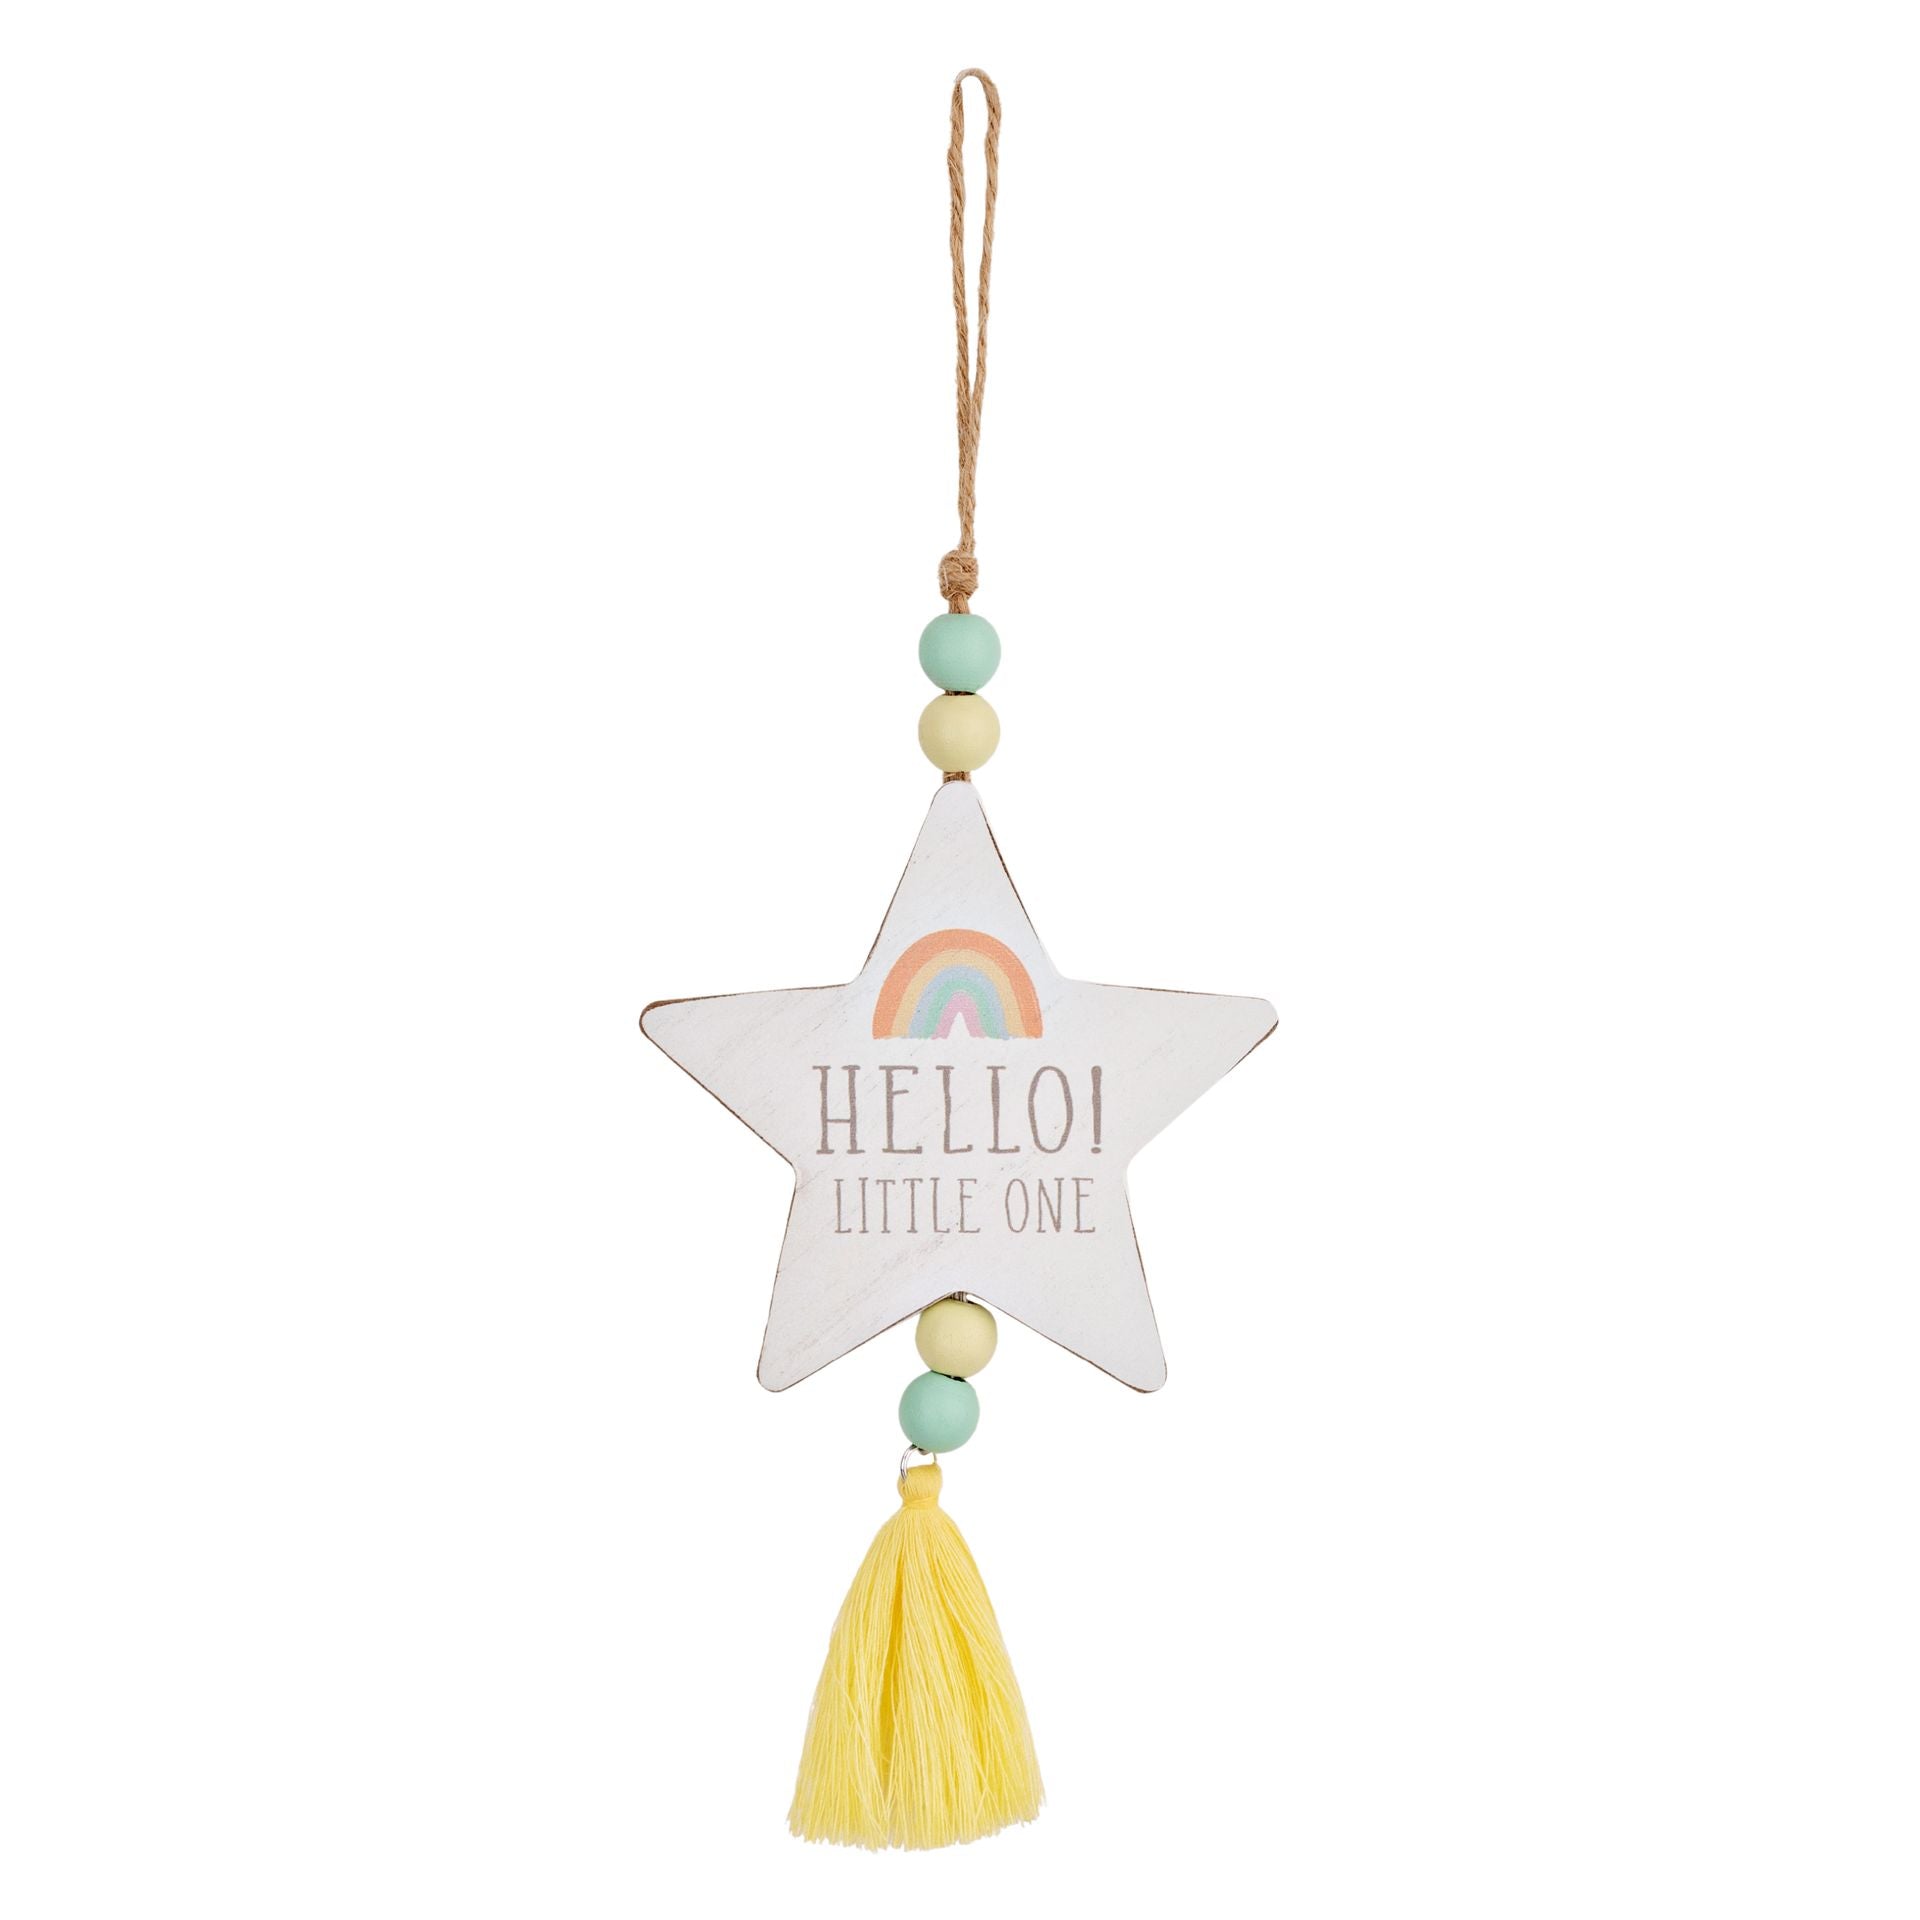 A star planing hanging on beaded thread with a small rainbow and 'hello little one' written in the star.